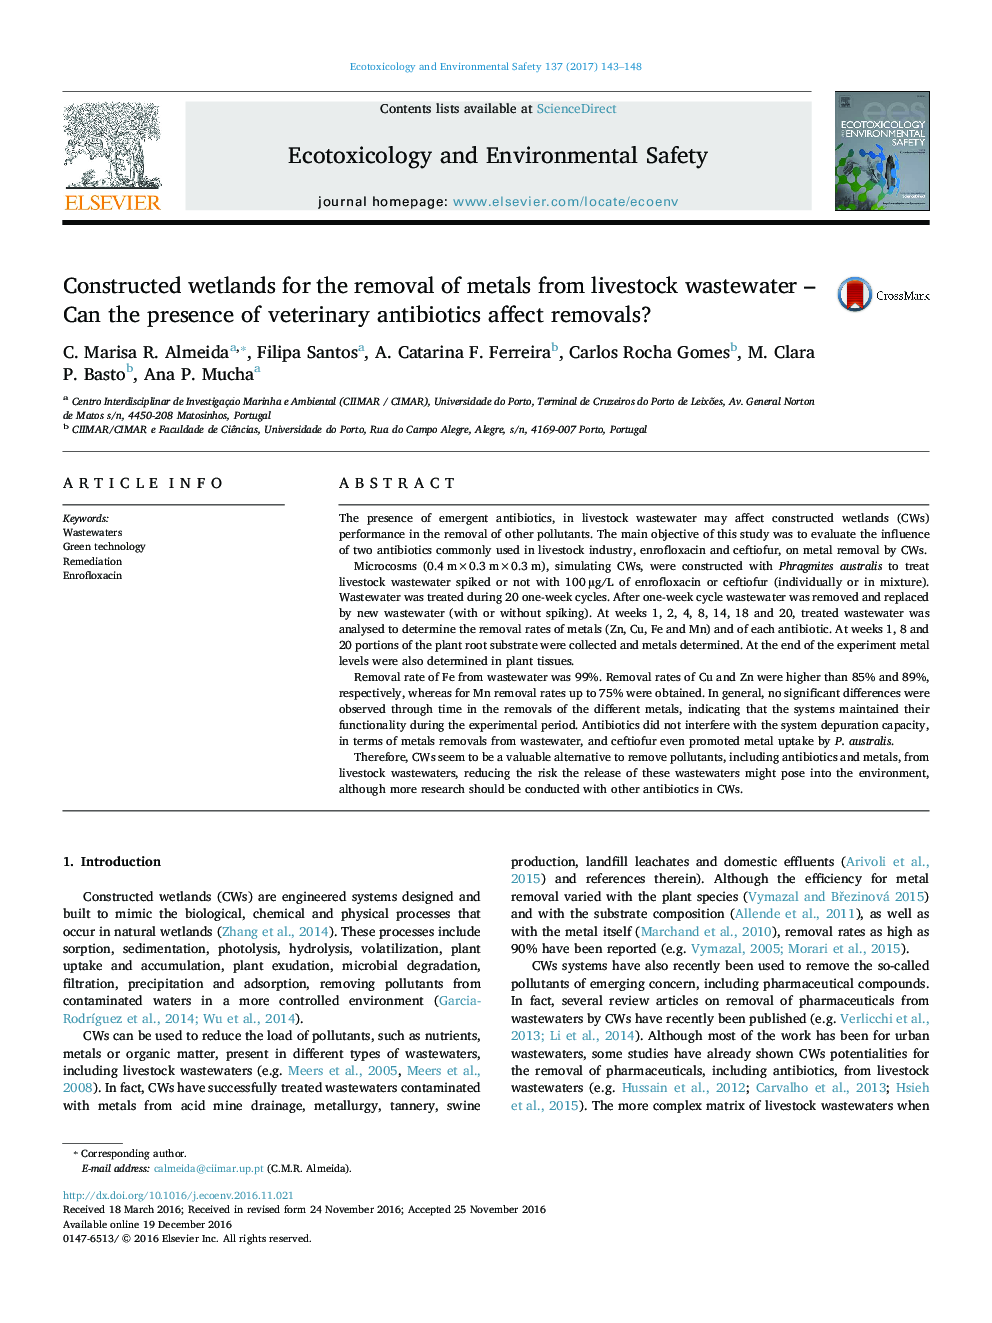 Constructed wetlands for the removal of metals from livestock wastewater - Can the presence of veterinary antibiotics affect removals?